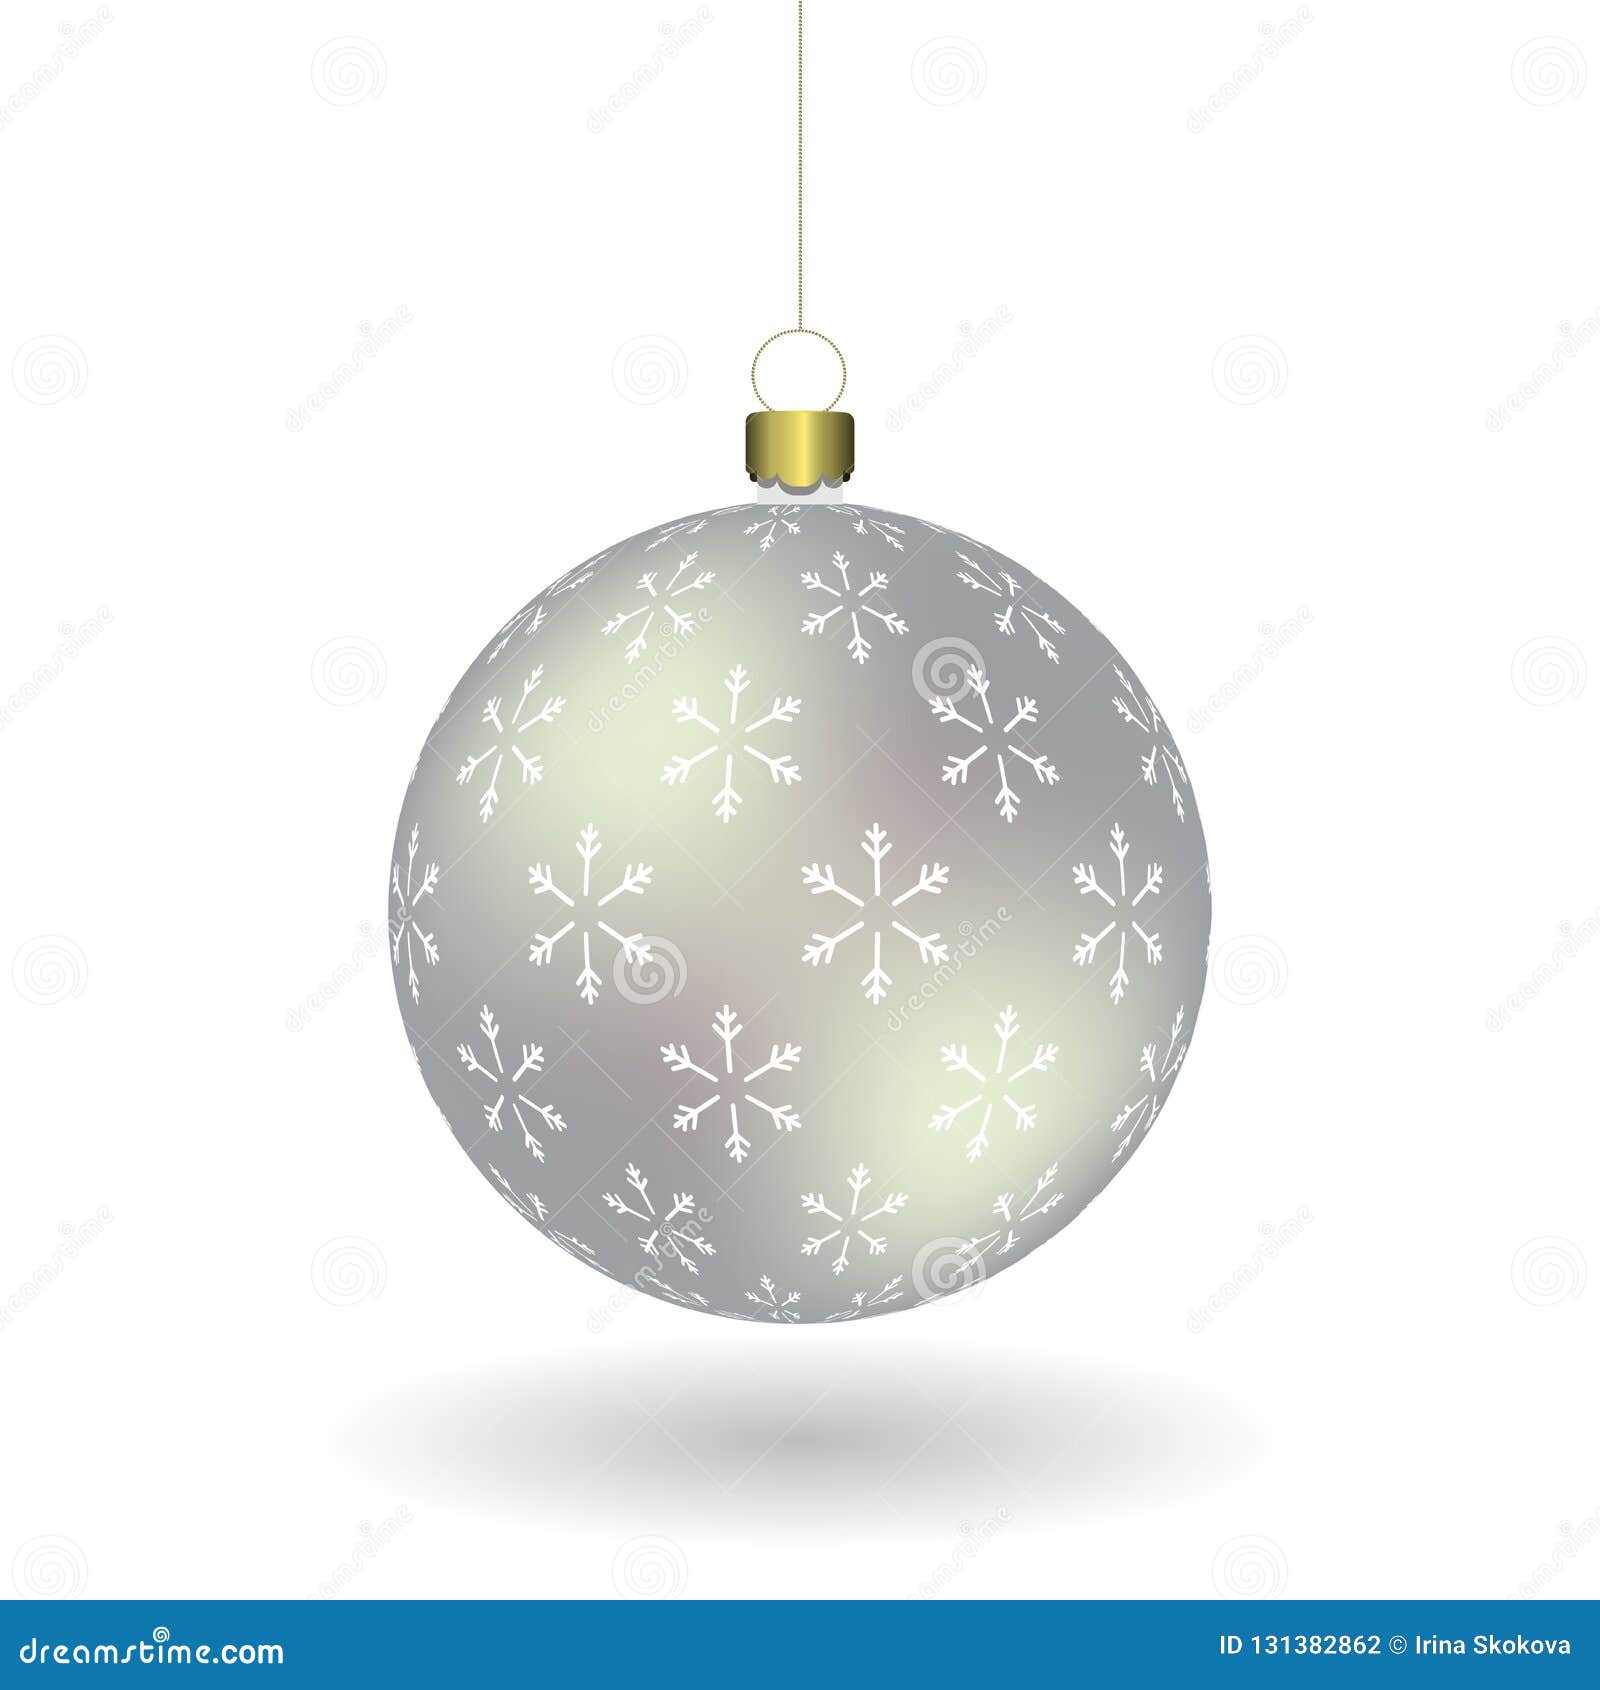 silver christmass ball with snowflakes print hanging on a golden chain